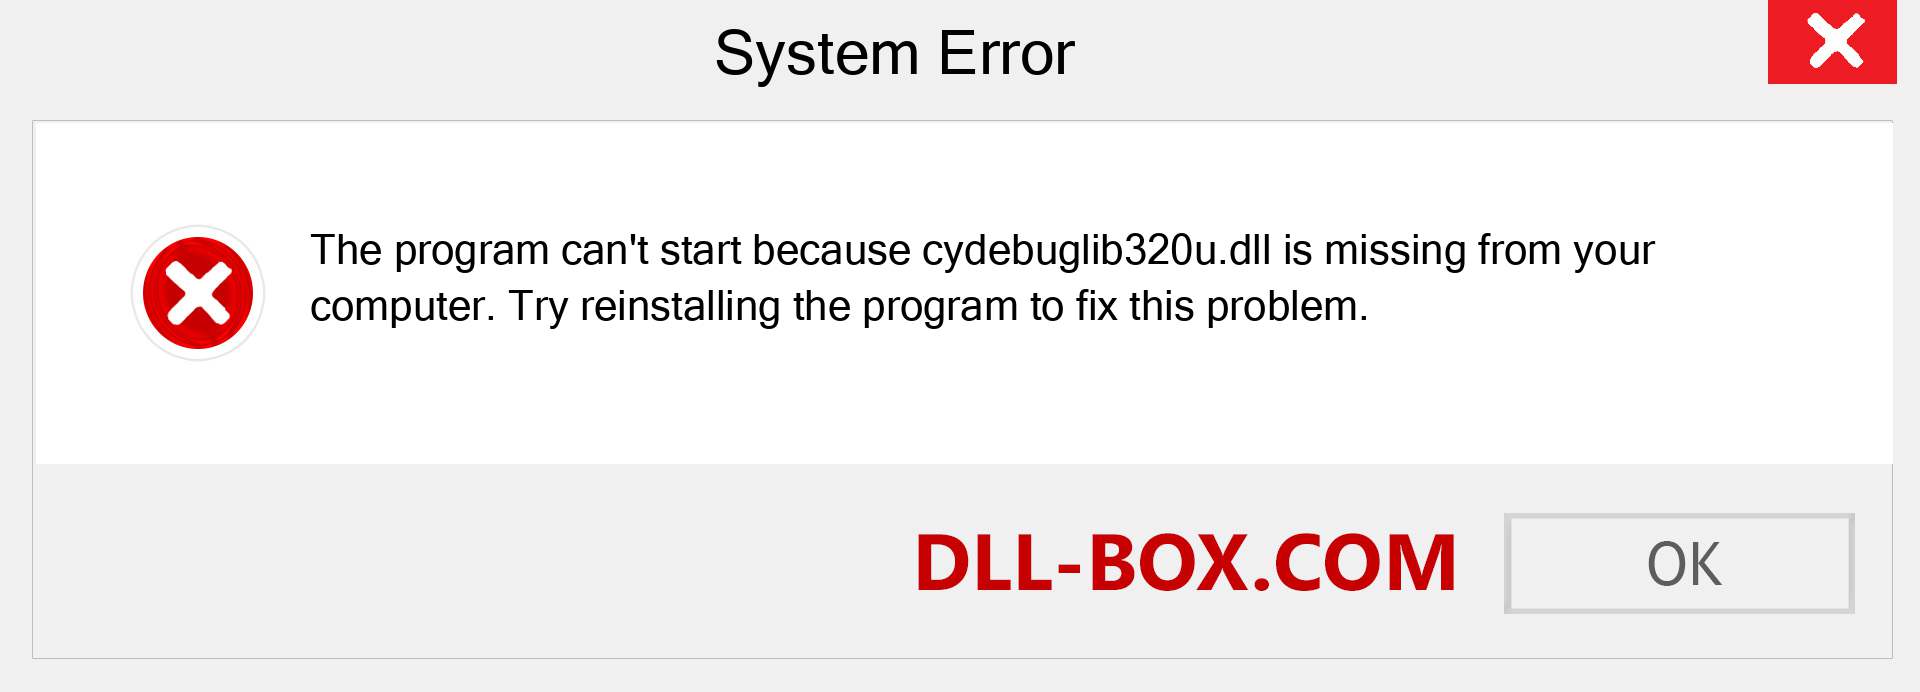  cydebuglib320u.dll file is missing?. Download for Windows 7, 8, 10 - Fix  cydebuglib320u dll Missing Error on Windows, photos, images